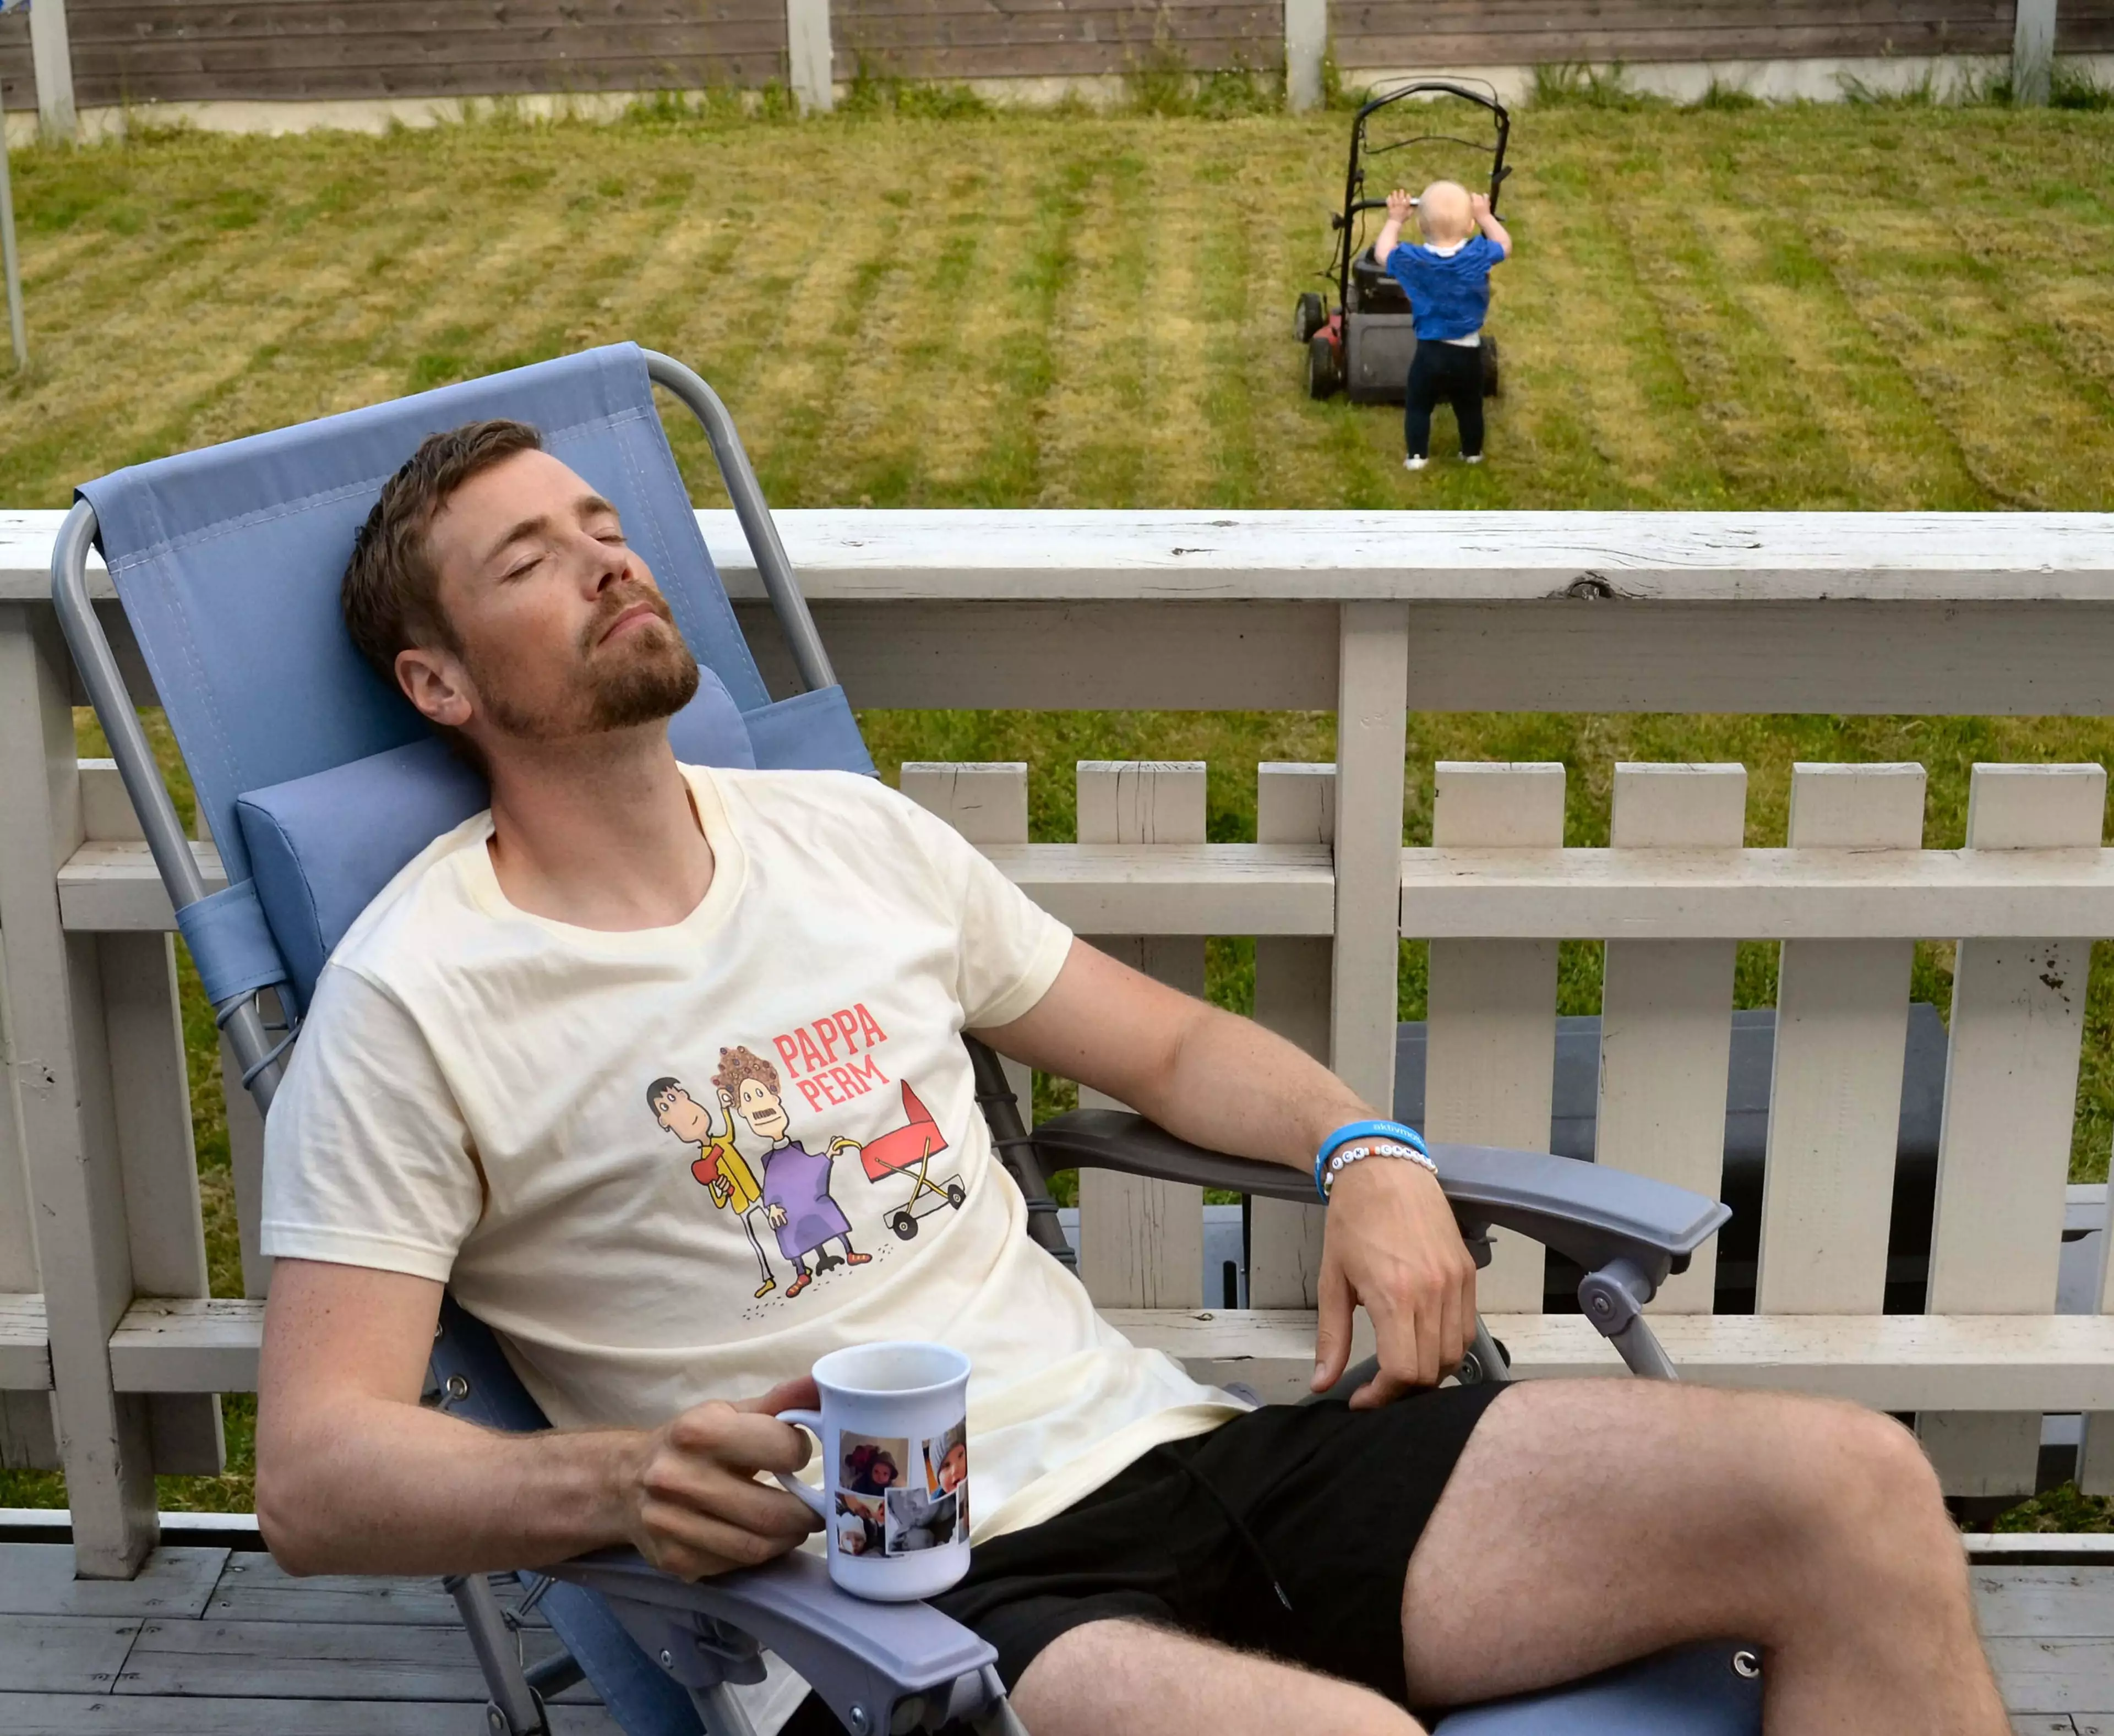 Dad Photoshops One-Year-Old Son Into Set Of Hilarious Household Chore Scenarios